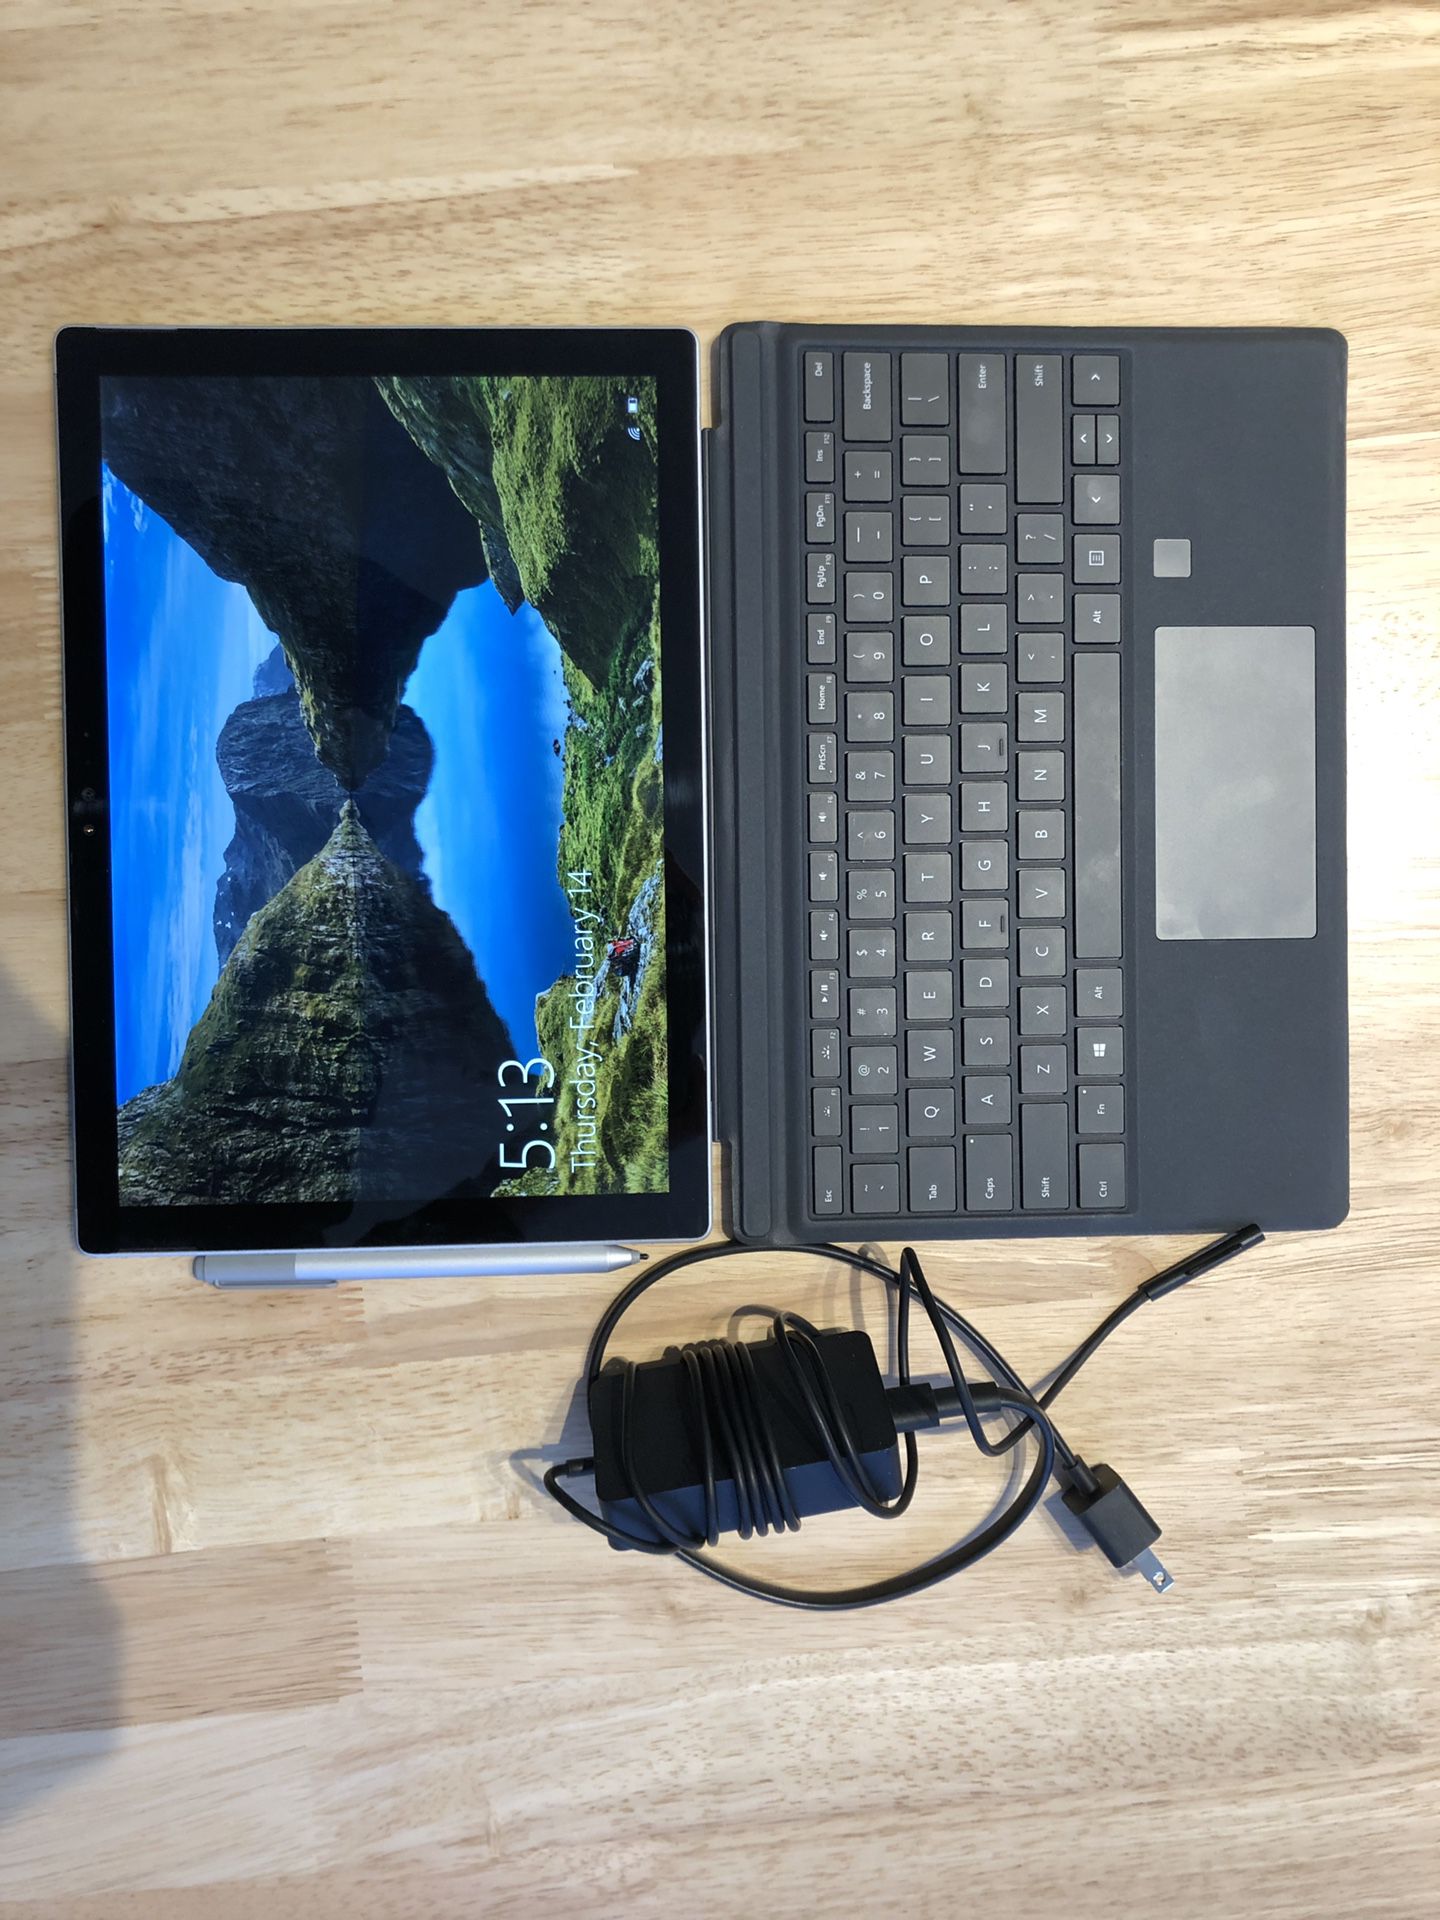 Surface Pro 4 i5-6300 8gb ram with pen and keyboard